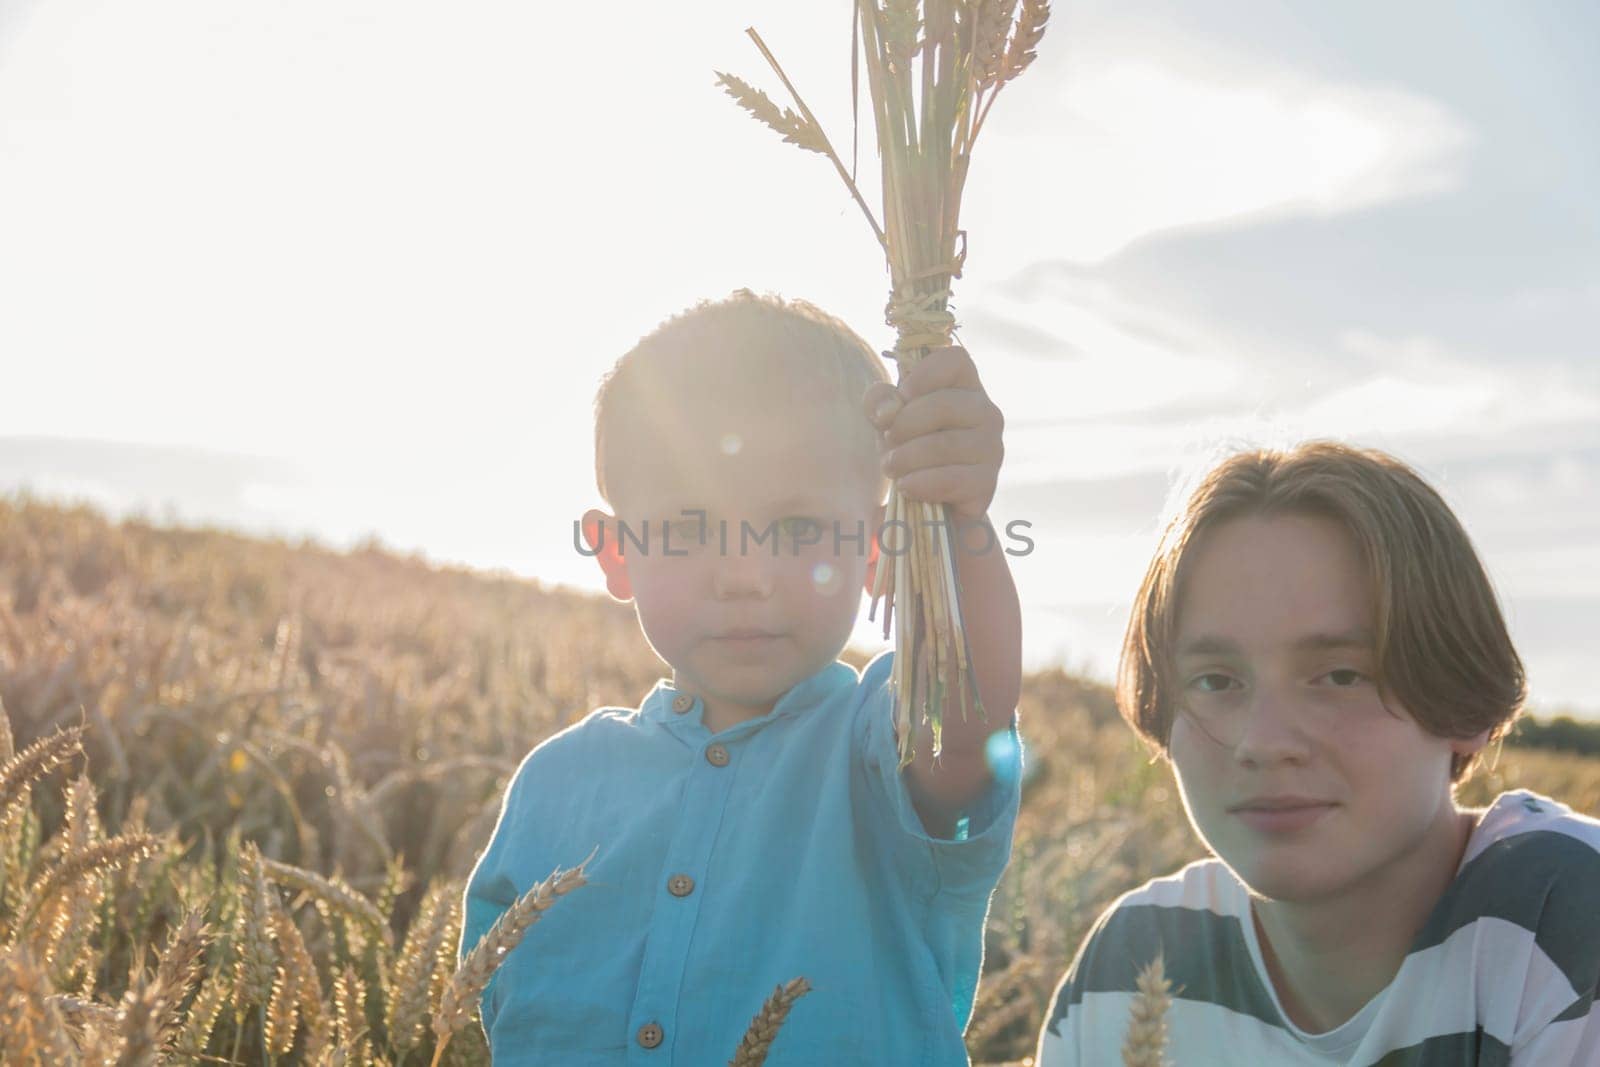 A little boy and his teenage brother are having fun walking in a field with ripe wheat. Grain for making bread. the concept of economic crisis and hunger